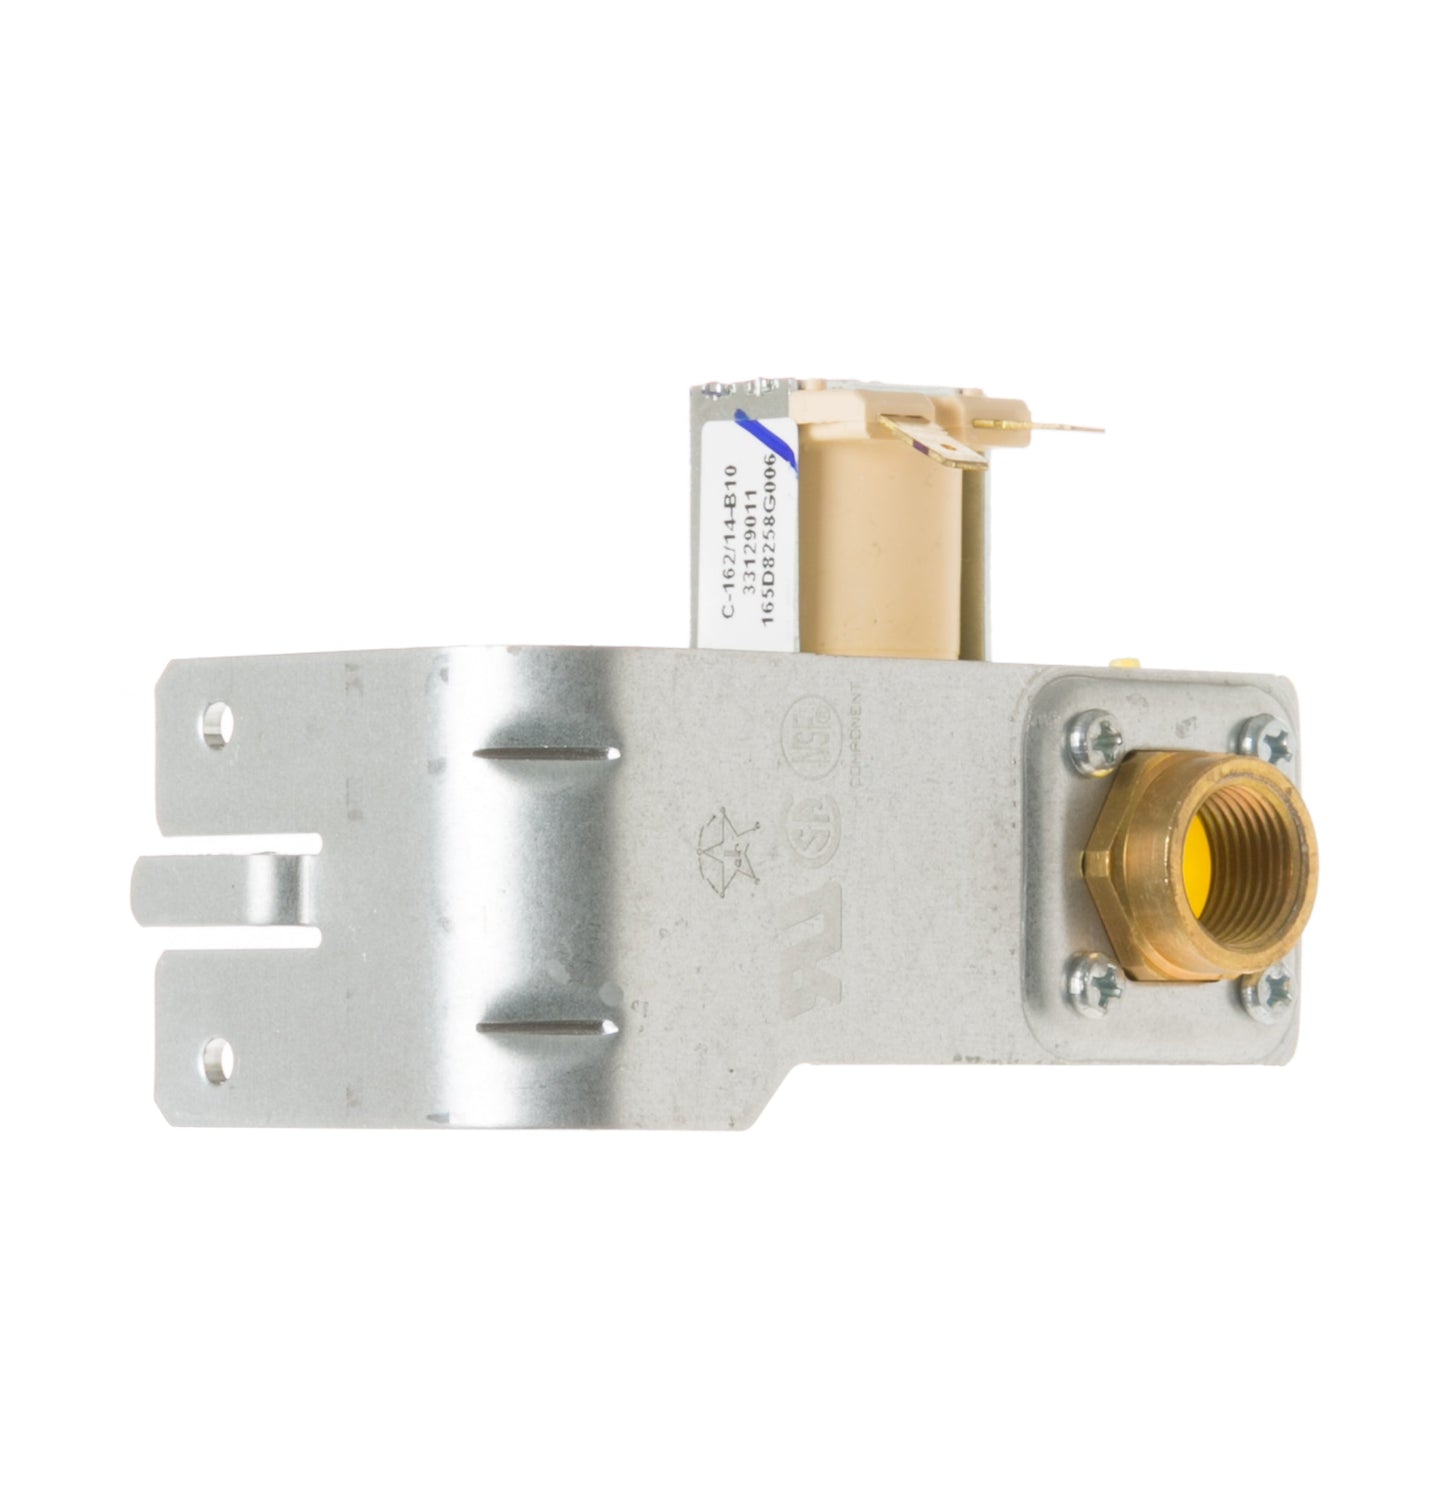 Whirlpool Dishwasher Water Inlet Valve - WPW10567653, Replaces: W10567653 4448471 AP6023053 PS11756393 EAP11756393 PD00035822 INVERTEC